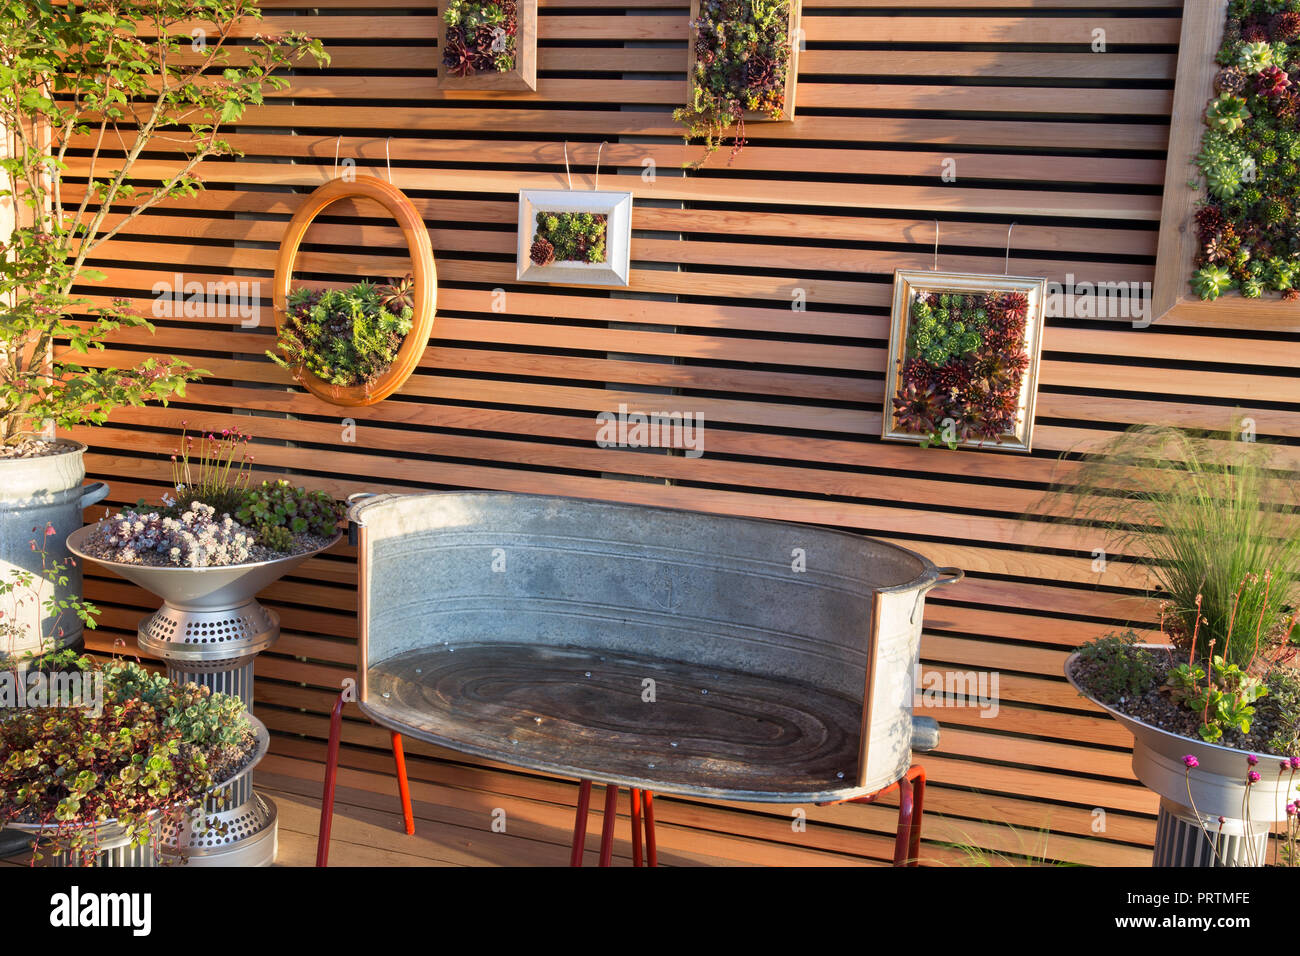 Balcony garden, repurposed recycled furniture and containers filled with succulents and herbs. Sempervivum and mixed succulent plants grown in wooden  Stock Photo